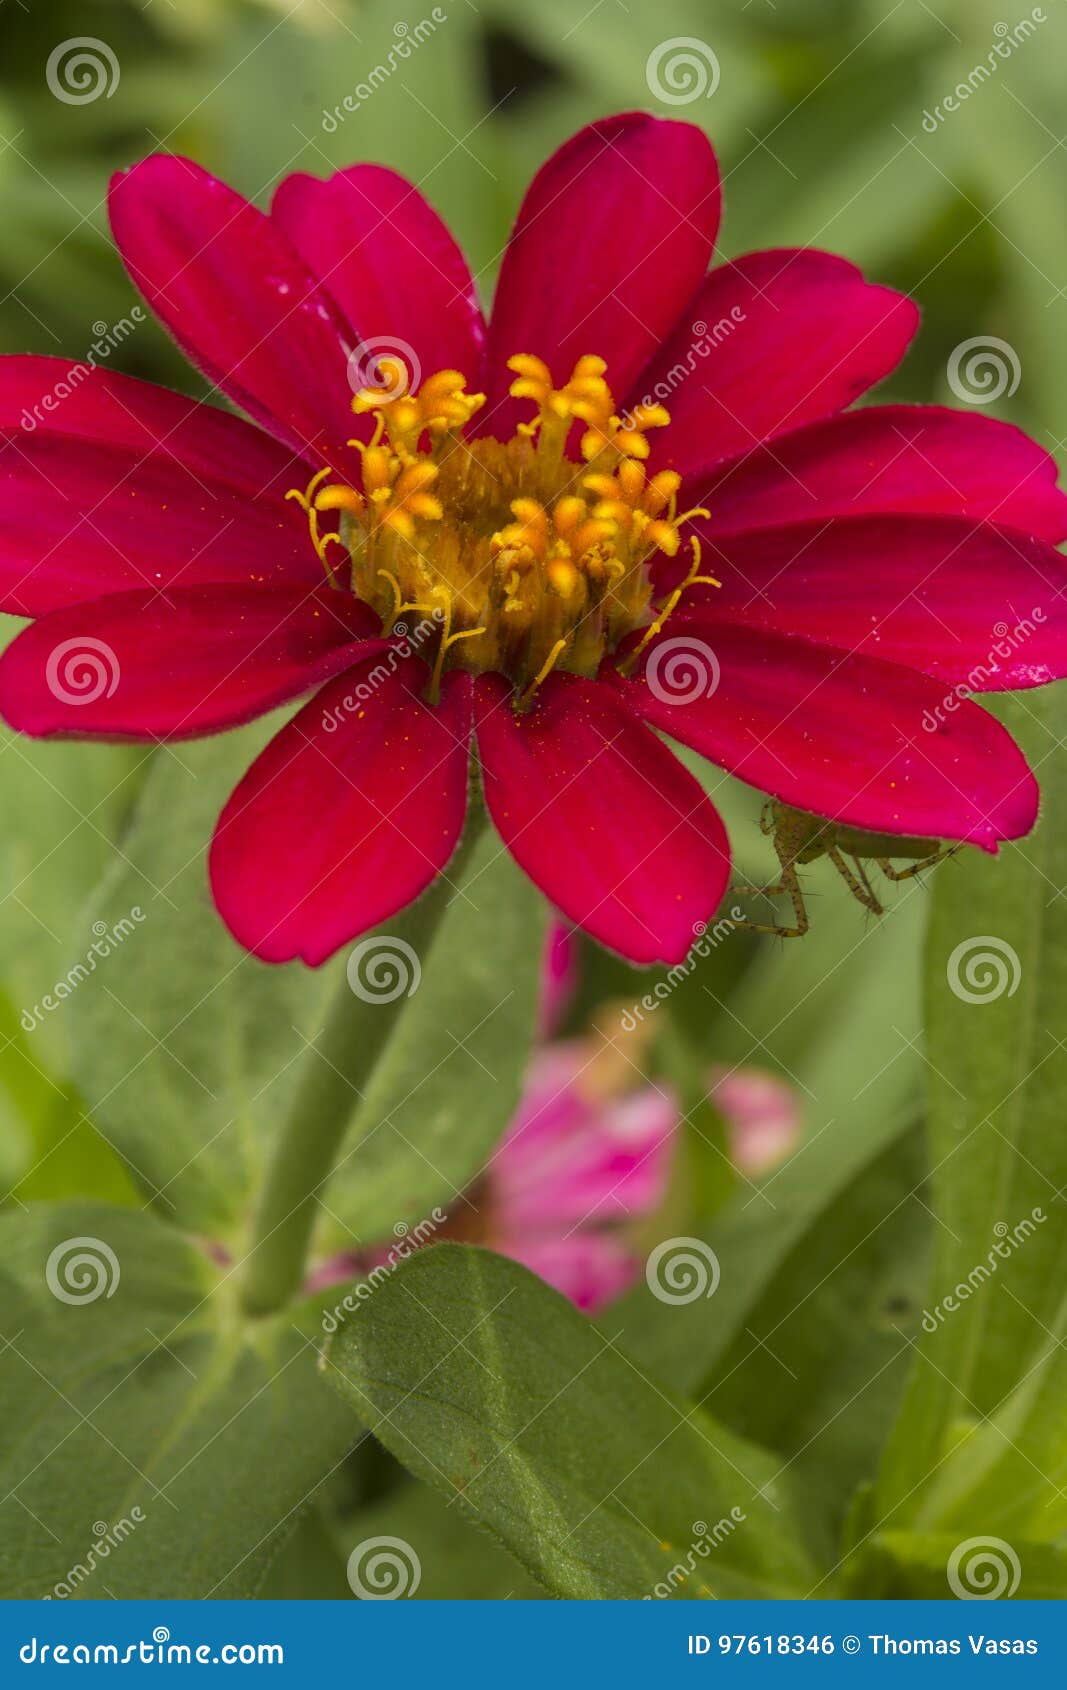 The Red Burgandy Flower Stock Photo Image Of Flowers 97618346